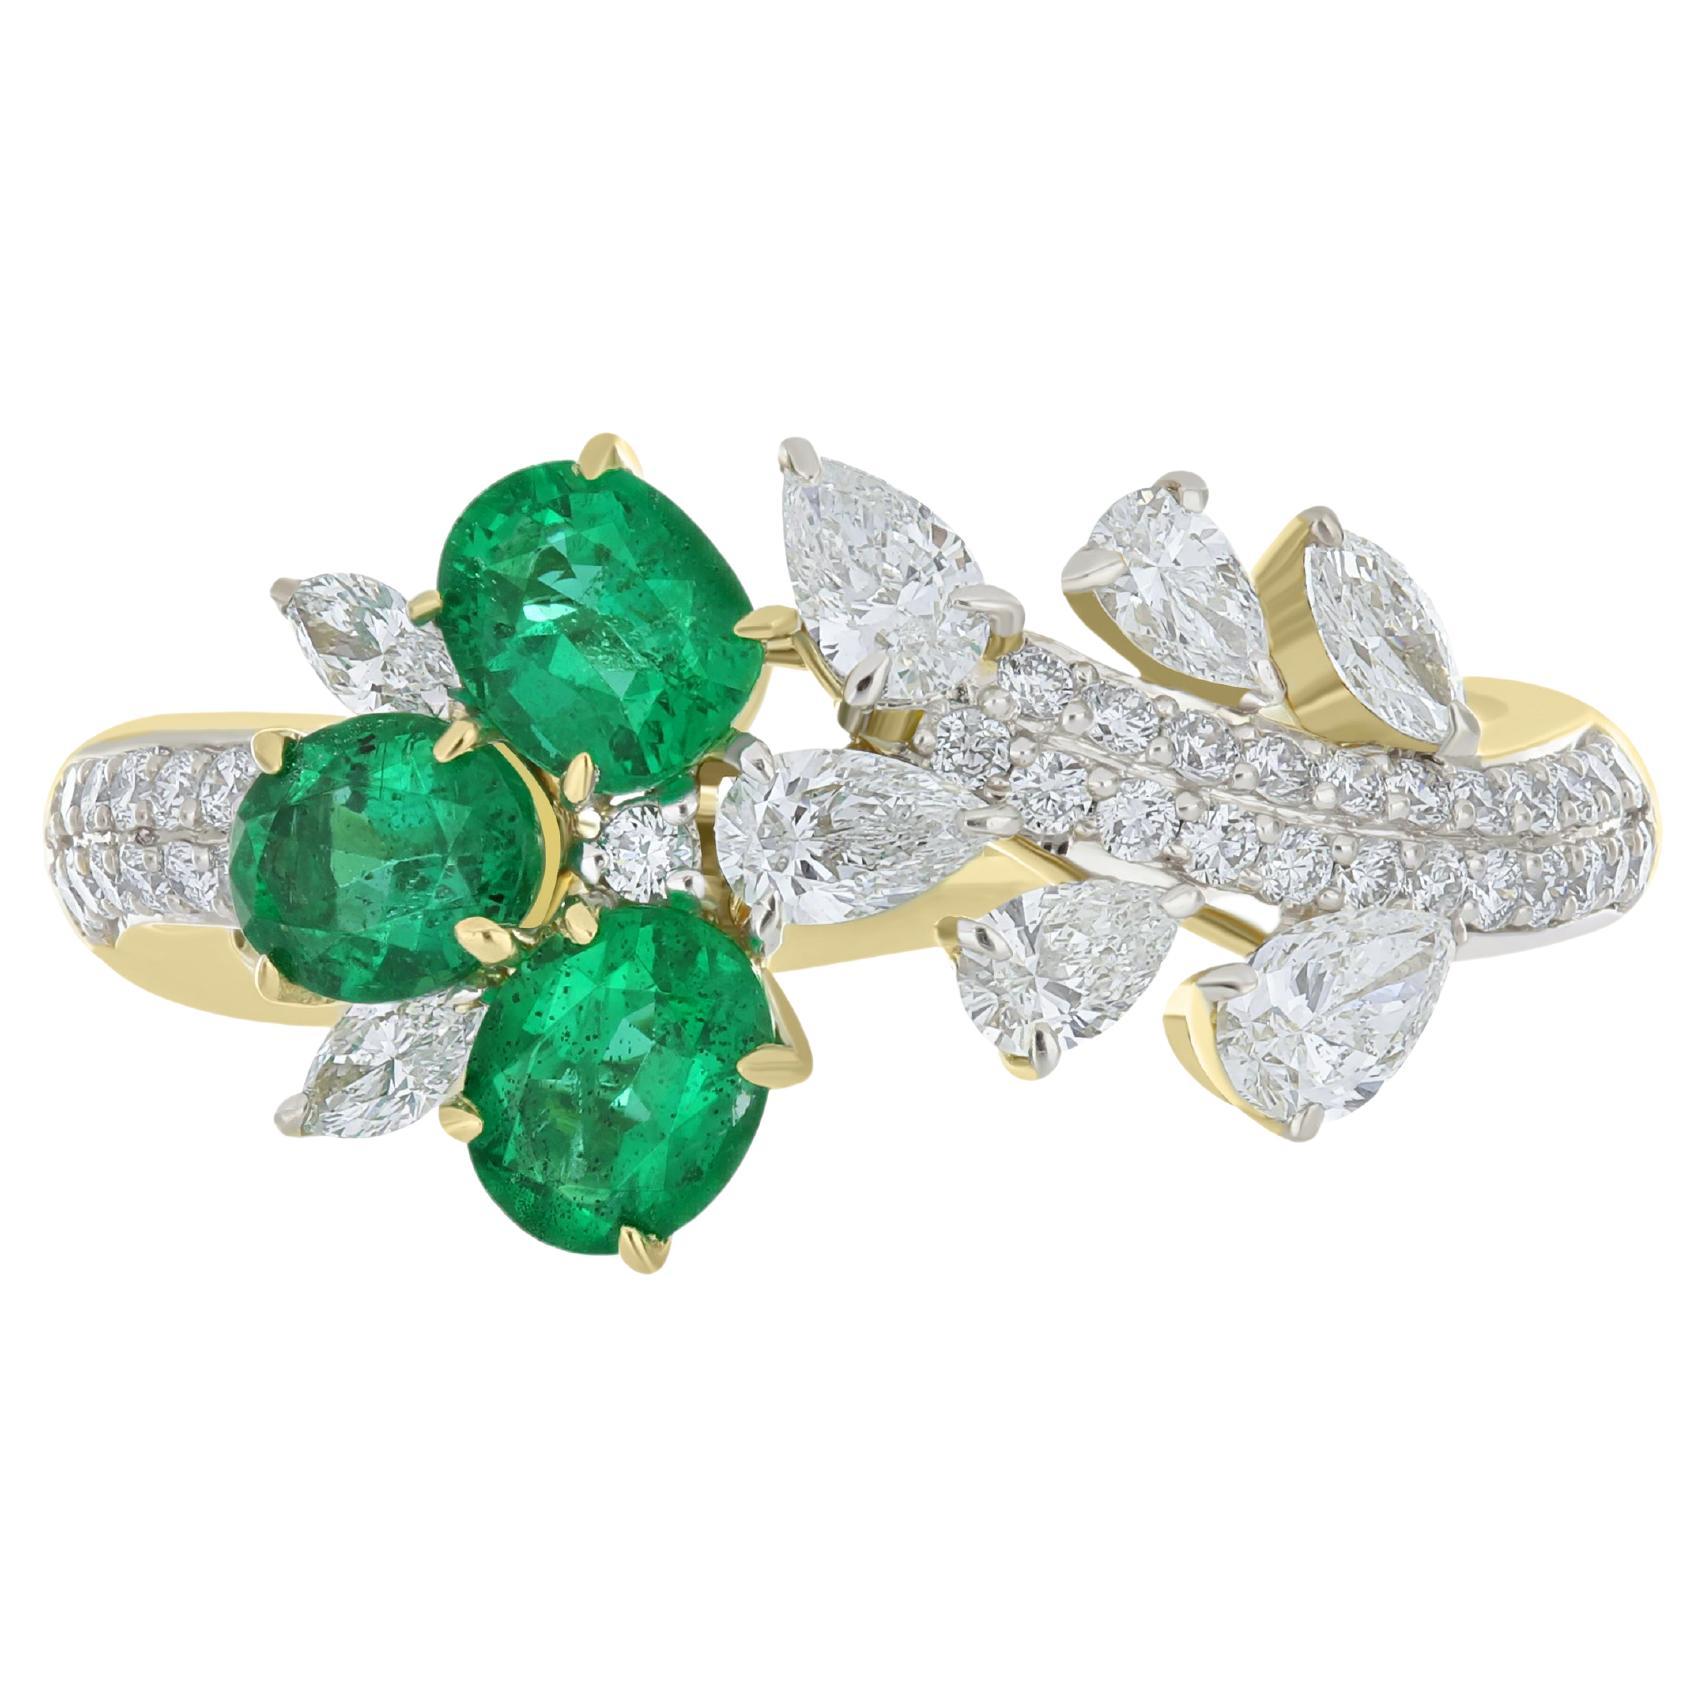 For Sale:  Emerald And Diamond Ring 18K White Gold handcraft Jewelry For Anniversary Gift